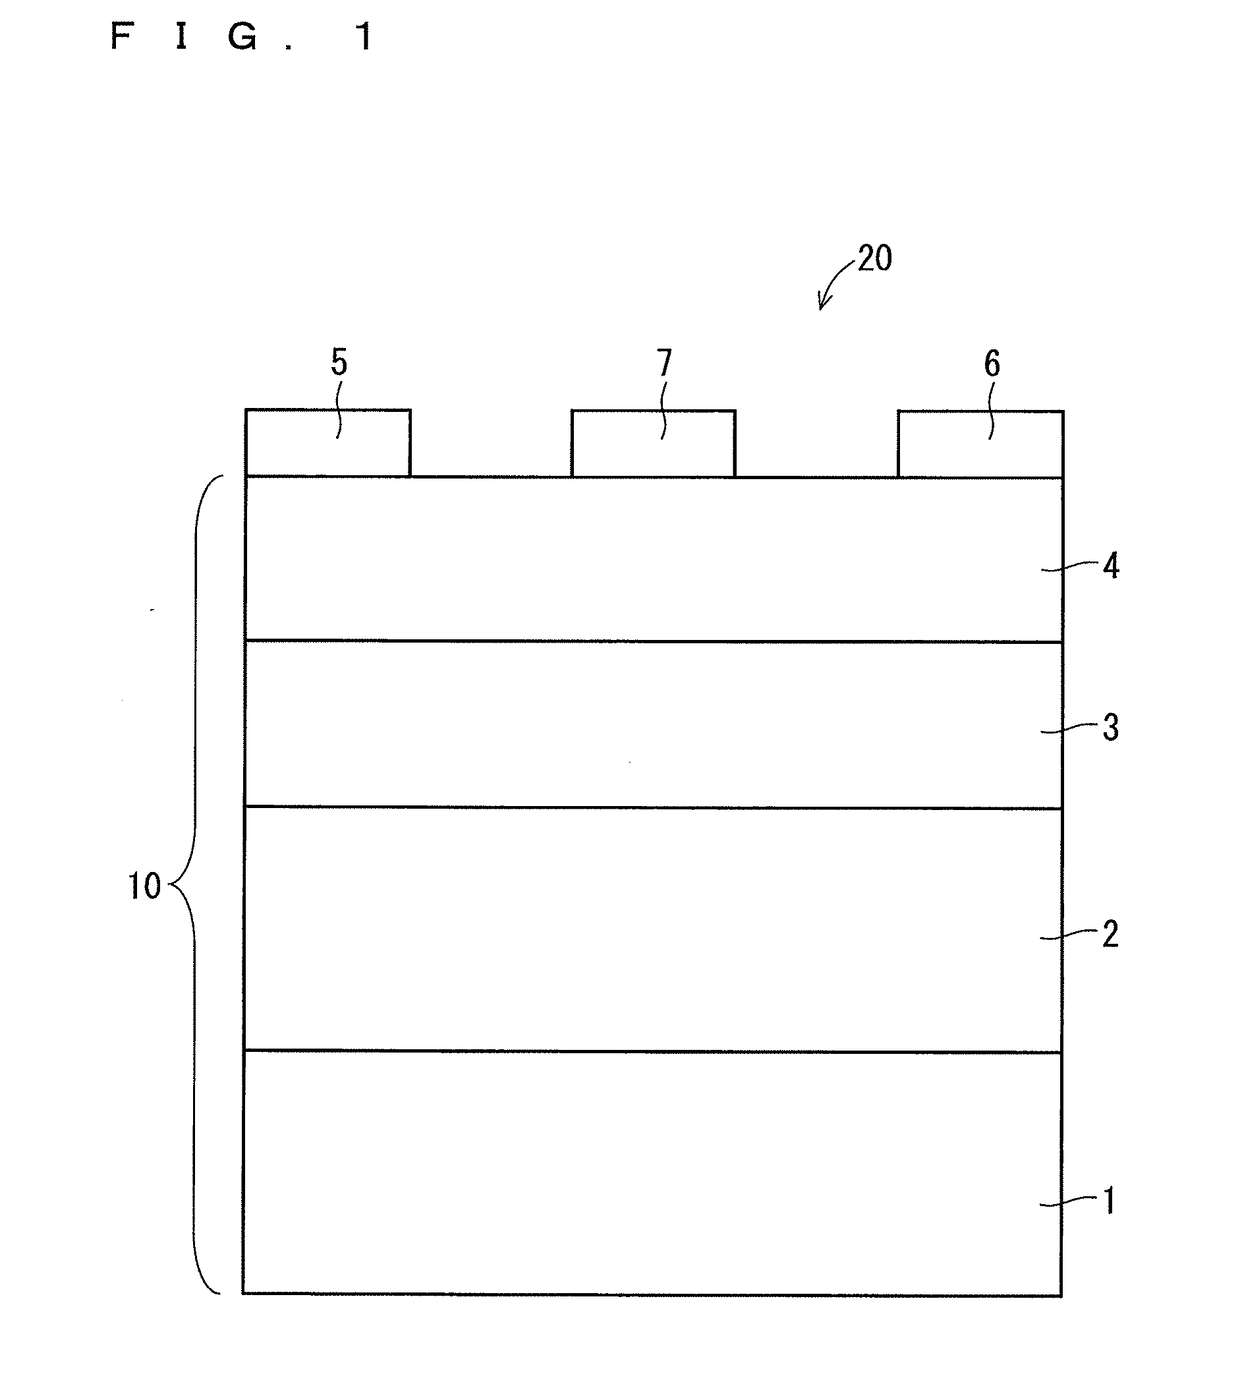 Epitaxial substrate for semiconductor elements, semiconductor element, and manufacturing method for epitaxial substrates for semiconductor elements